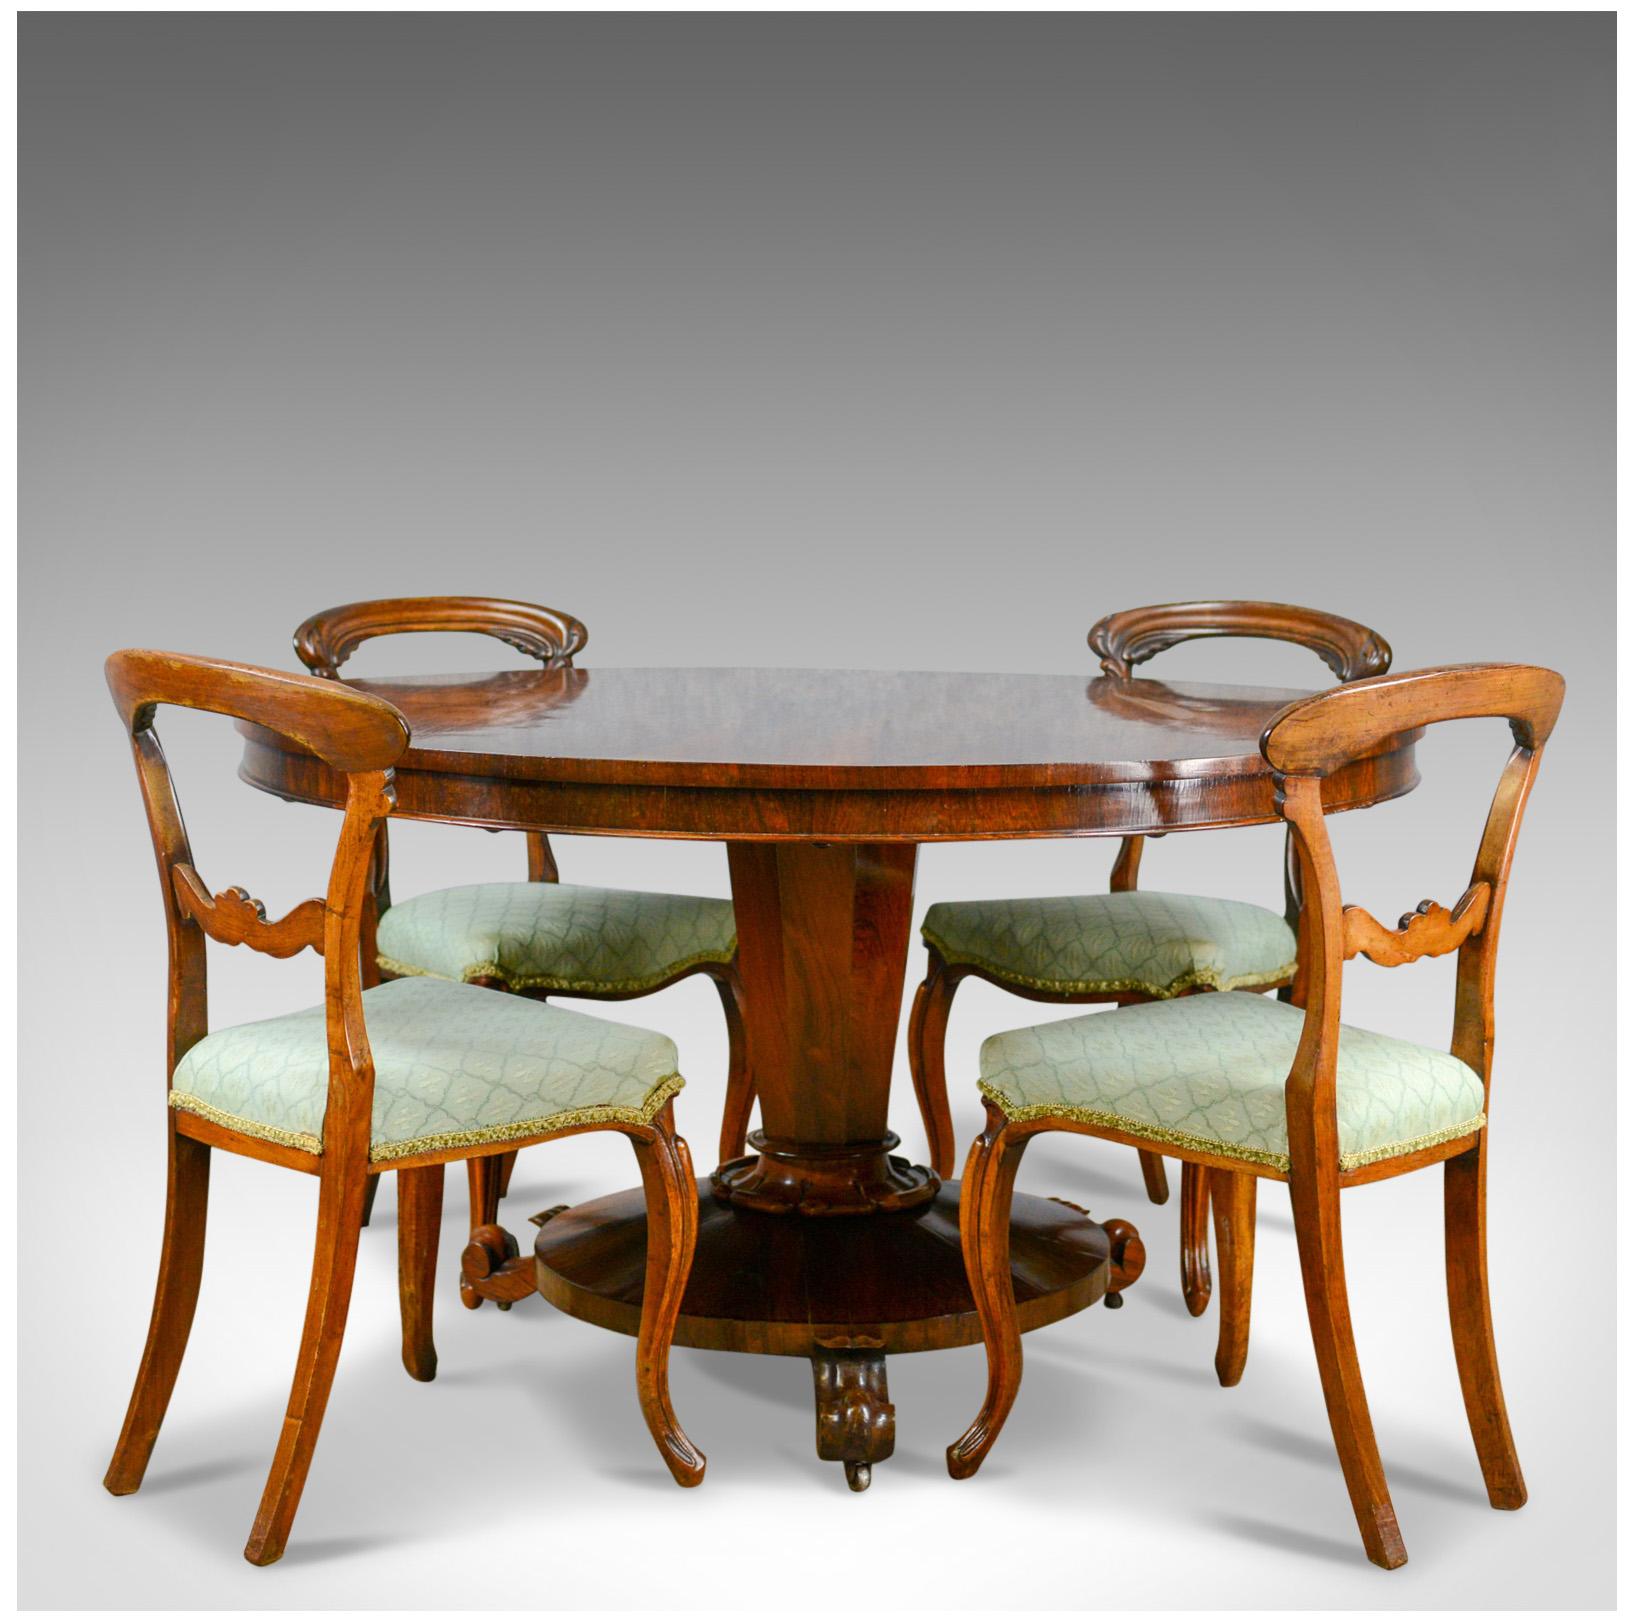 William IV Antique Breakfast Table English, Rosewood Tilt Top Dining, circa 1835 5